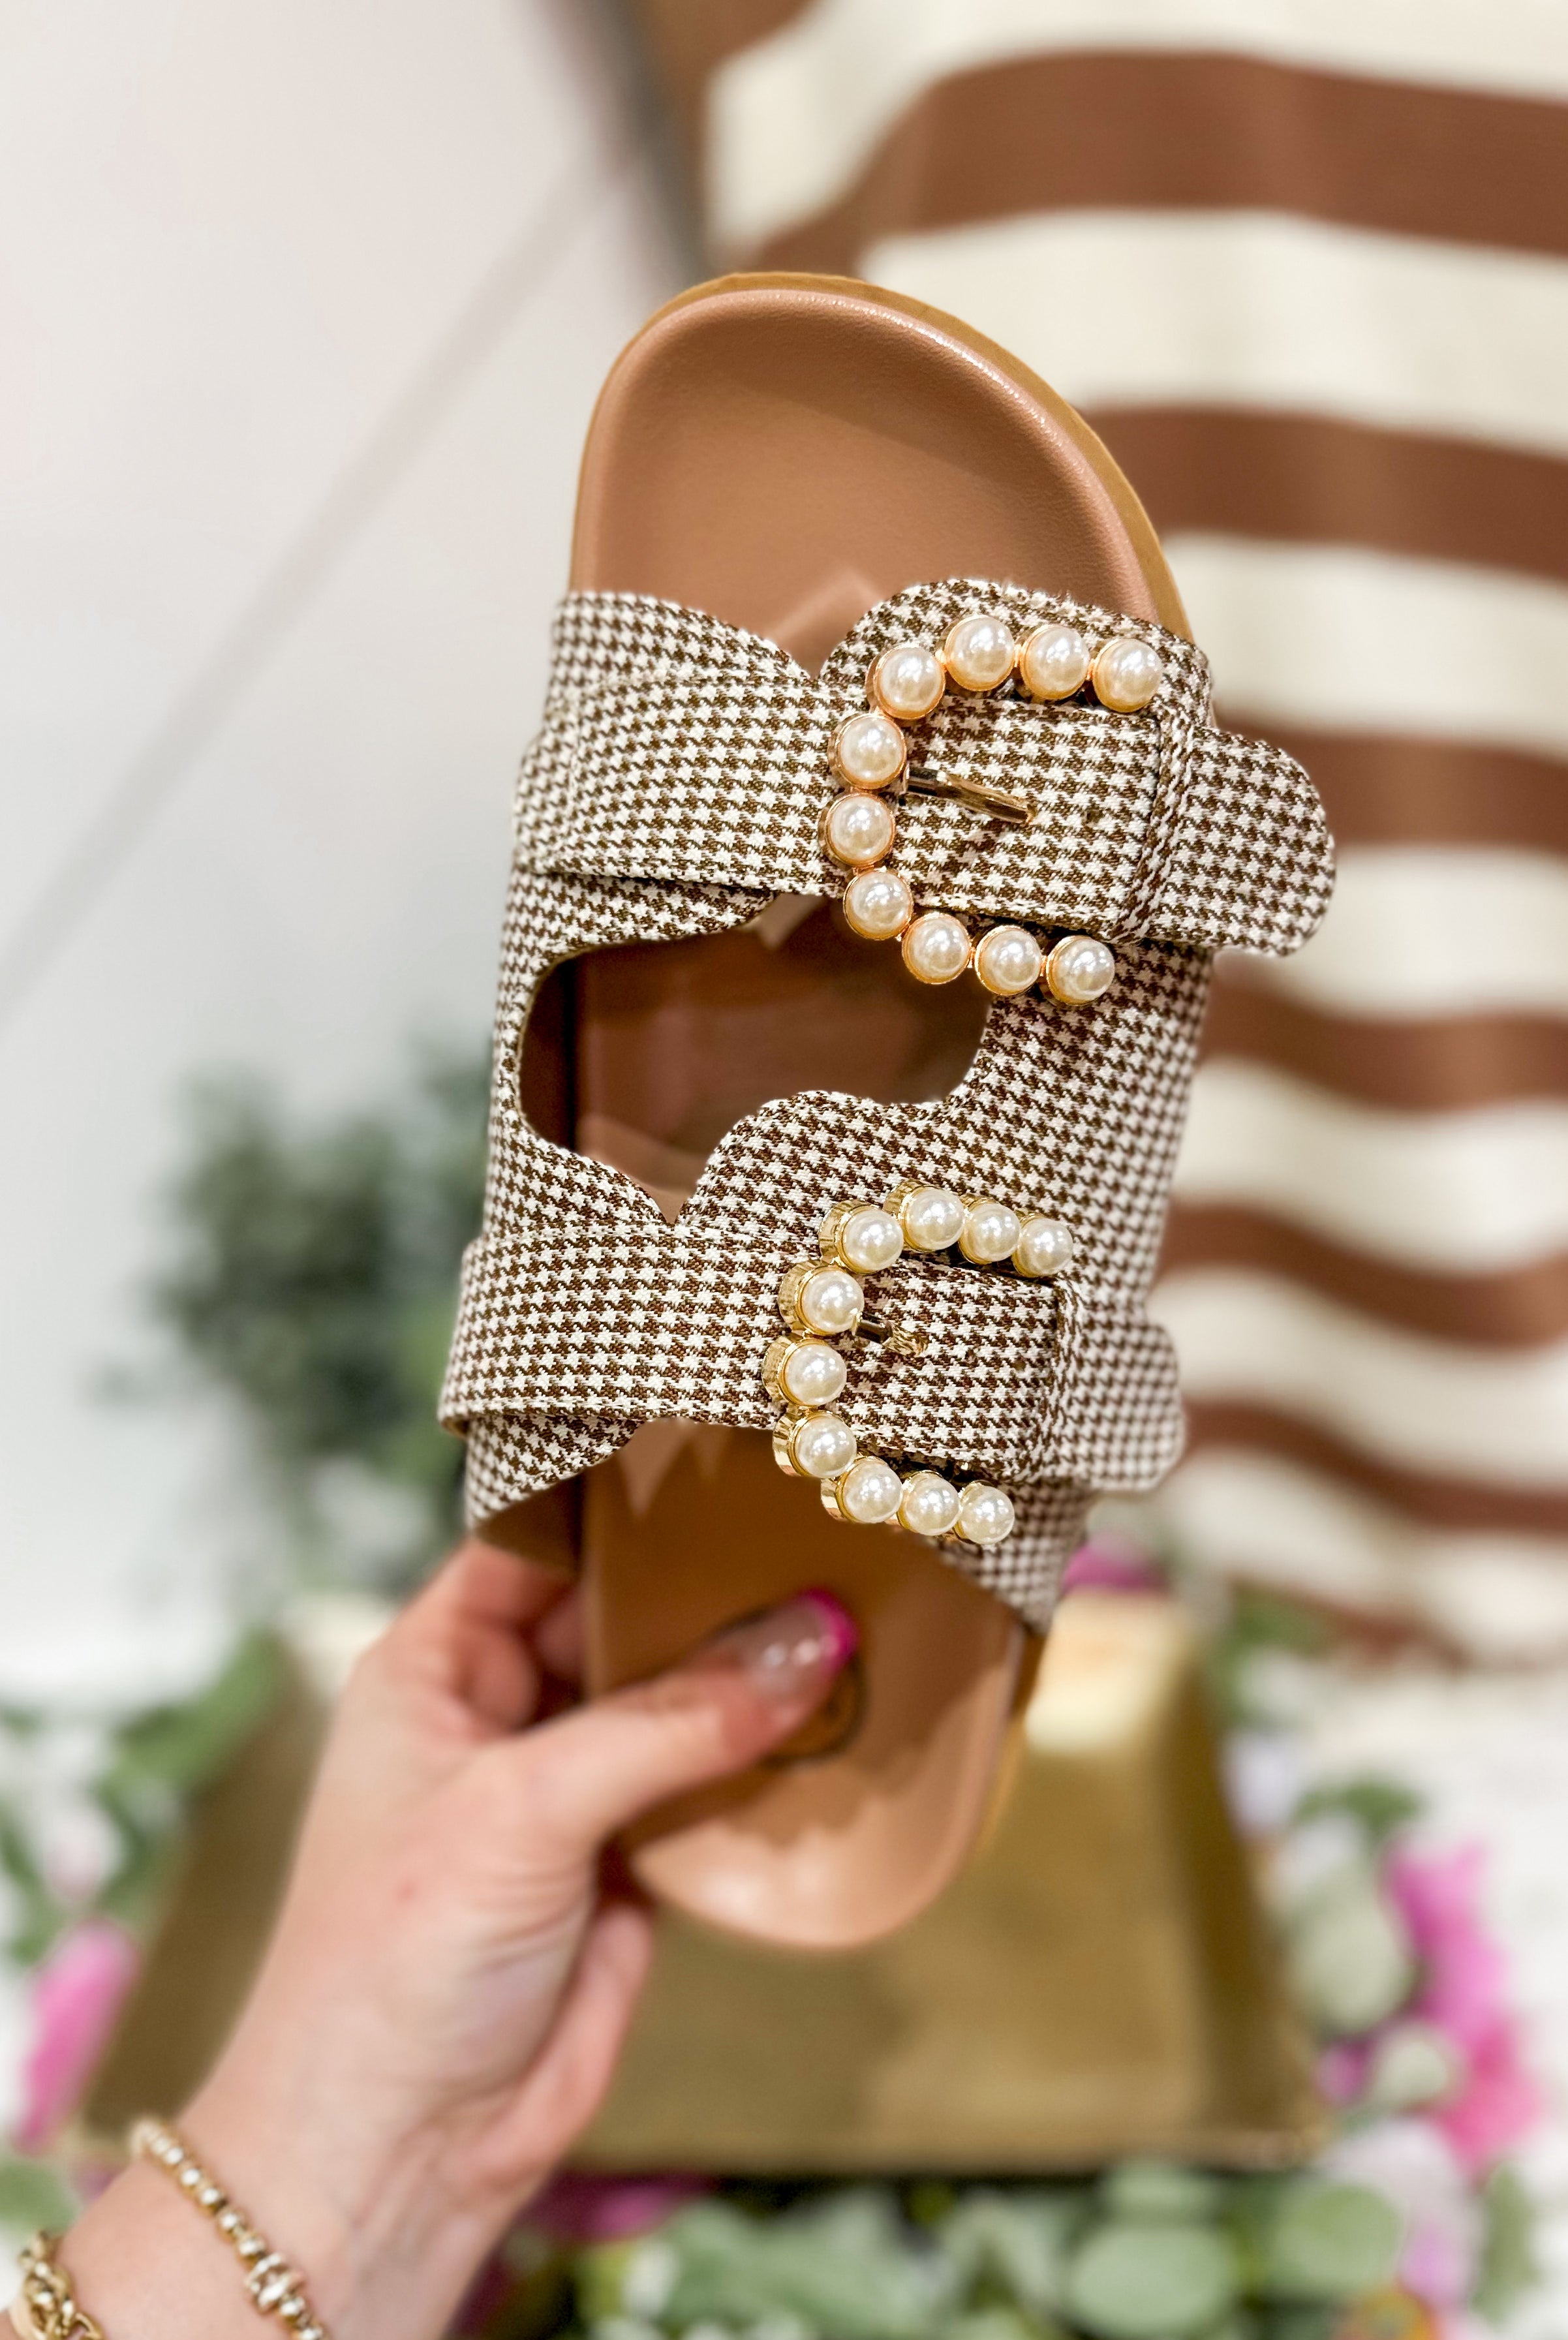 Kelly Nude Check Slides With Pearls - Be You Boutique